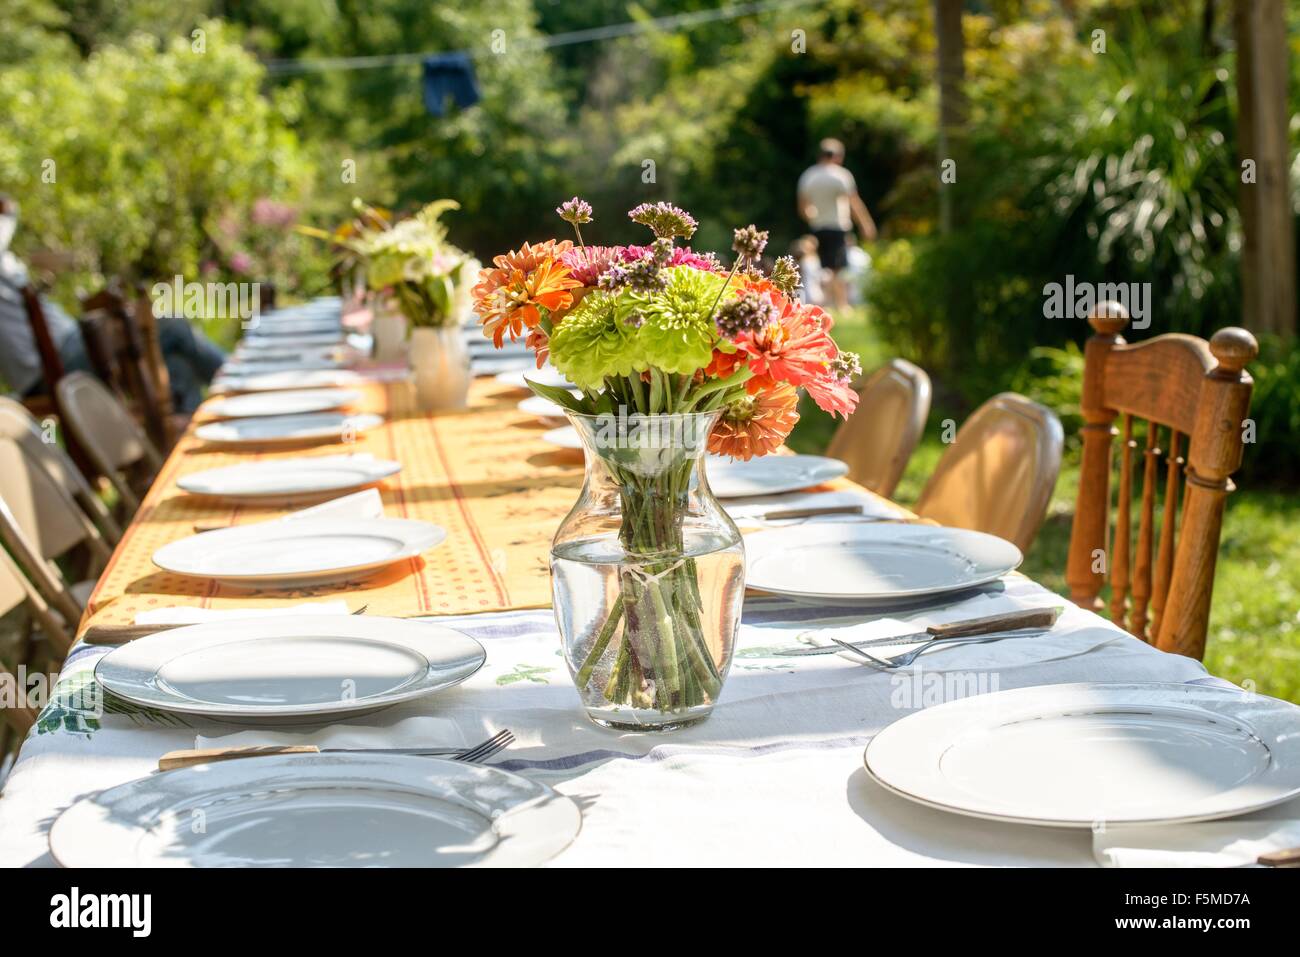 Table setting for large family at tomato eating festival Stock Photo